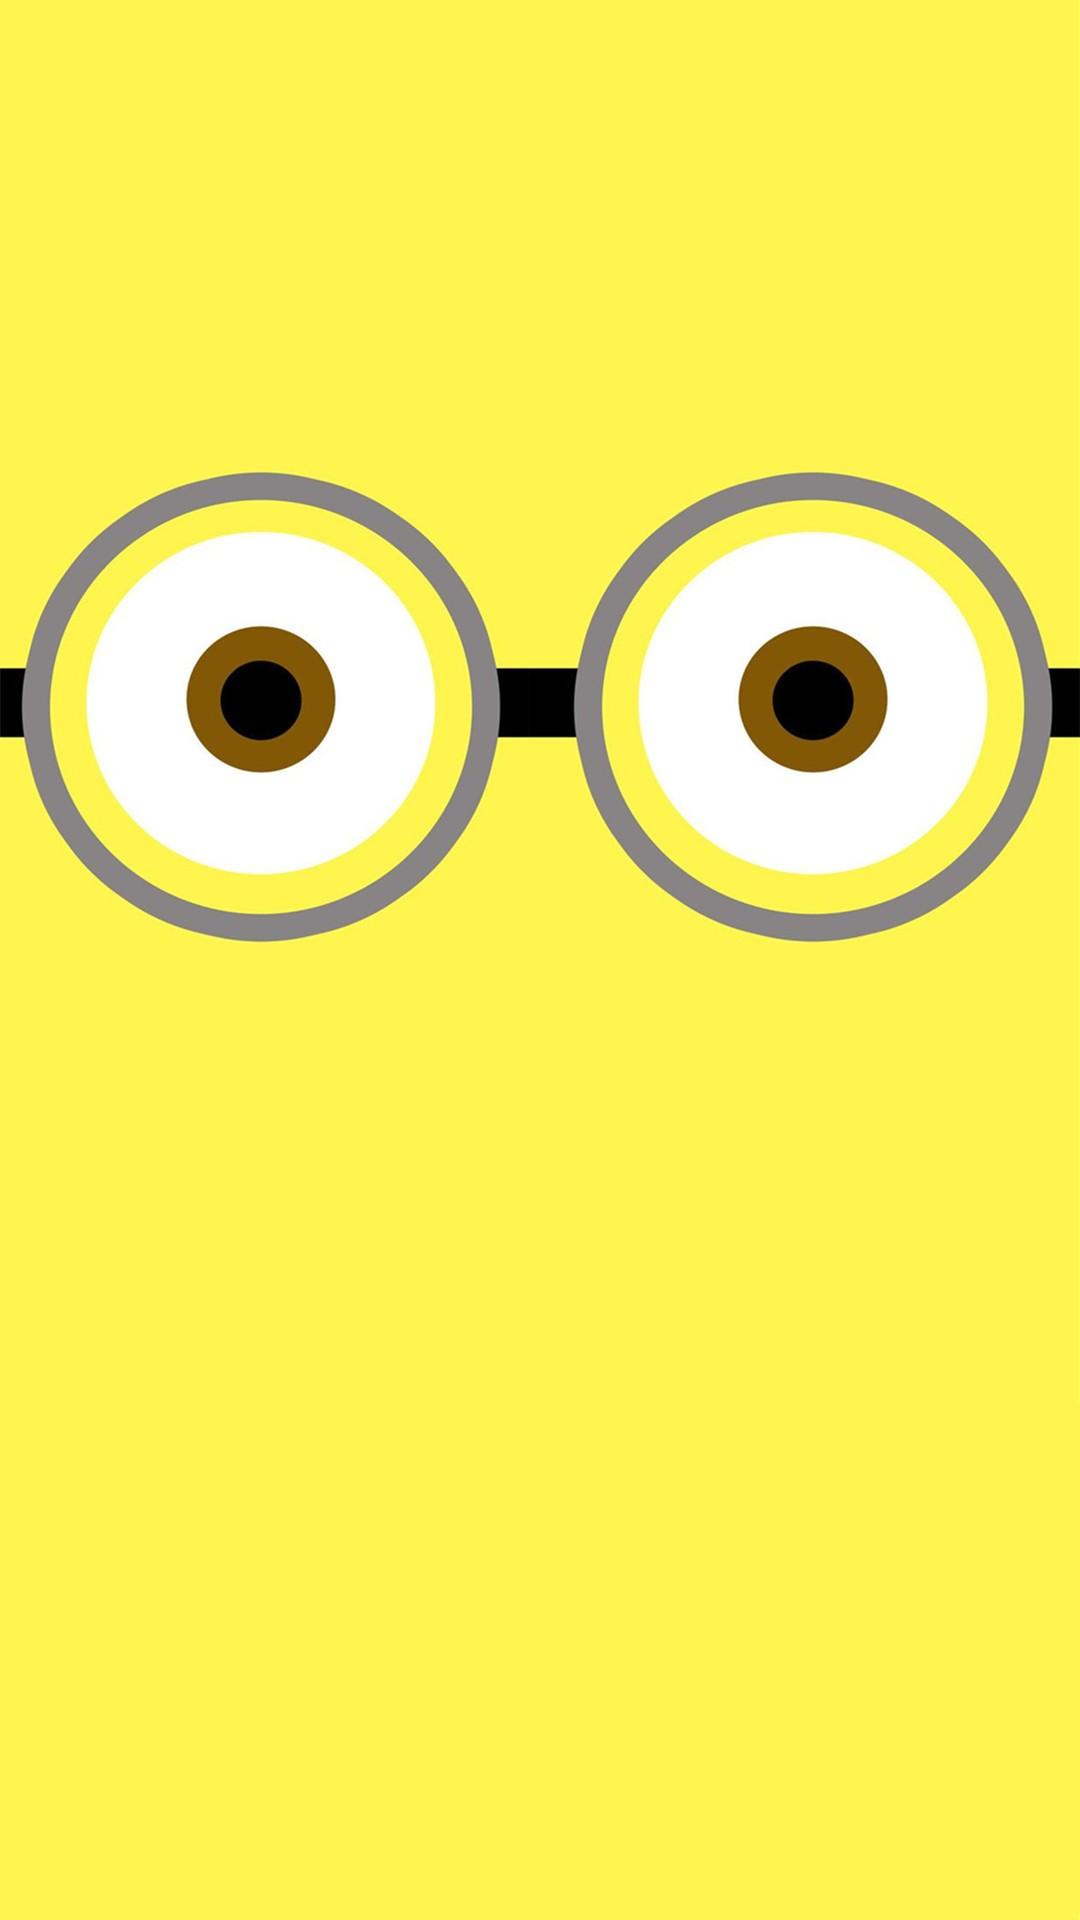 Wallpaper Weekends: It's the Minions!